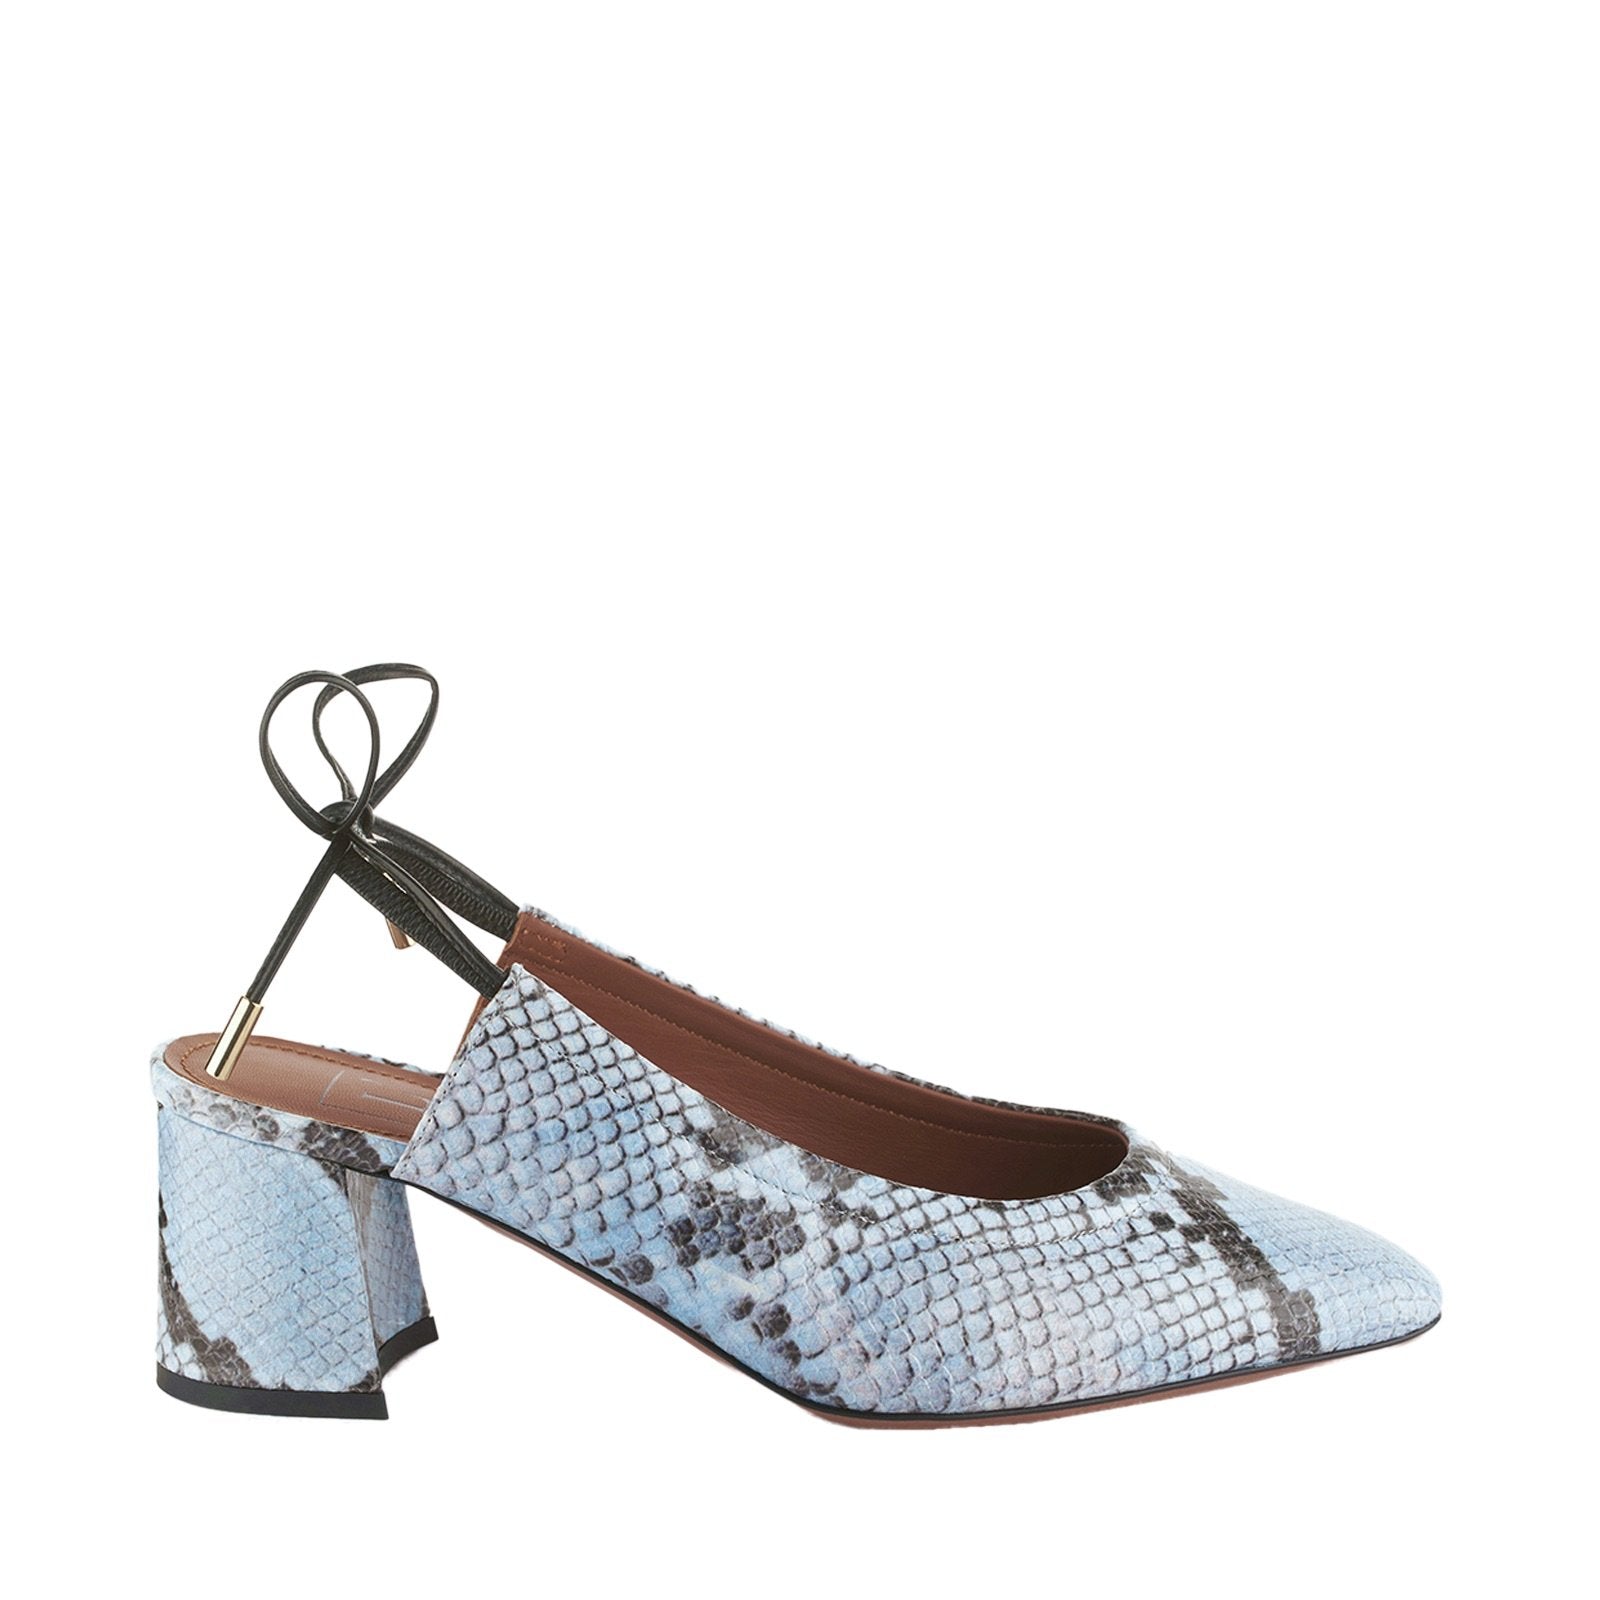 Slingback Shoes In Light Blue Python Print Leather Heels LDL037.60CP29117093 - 1